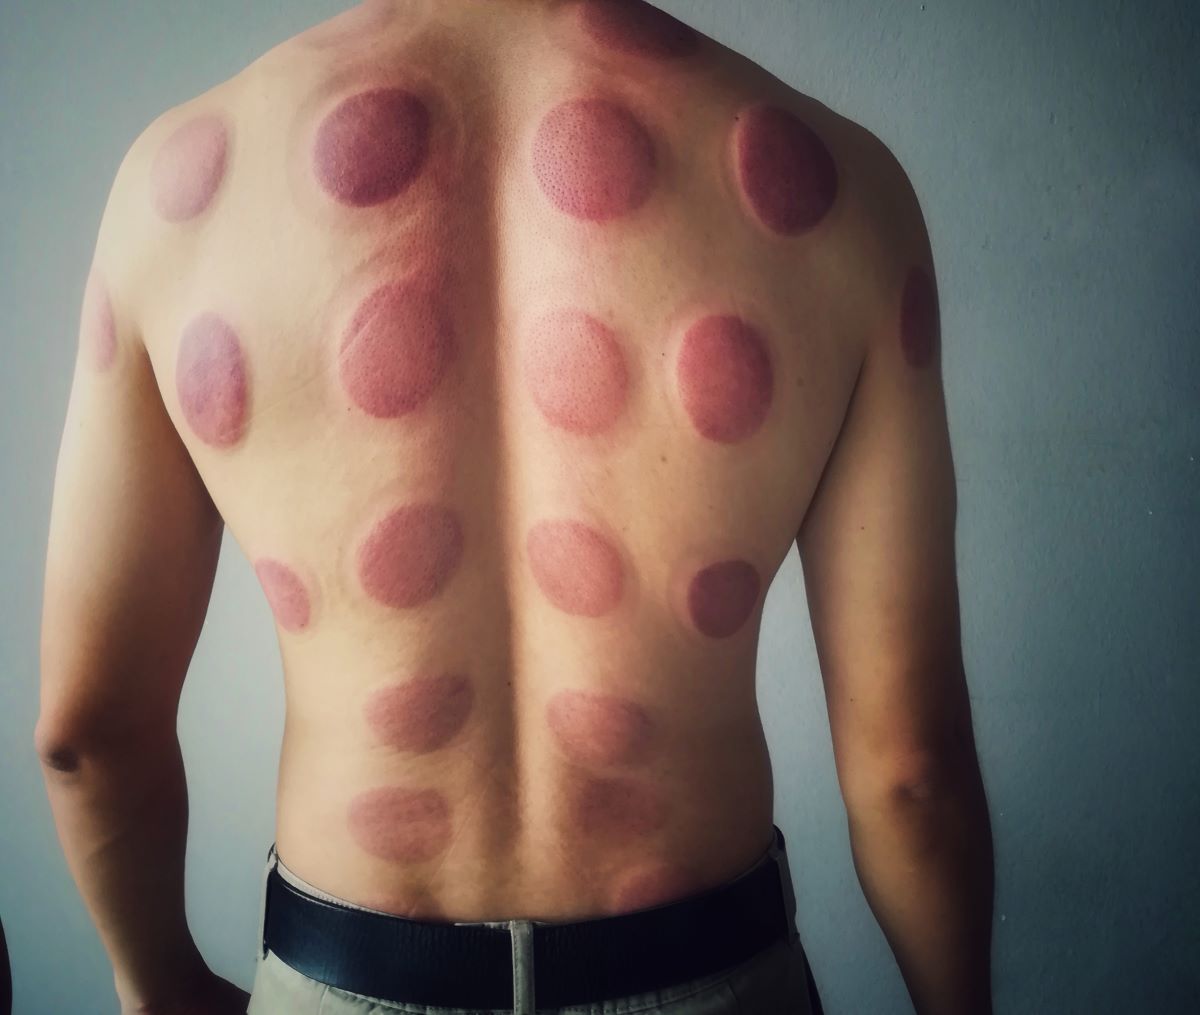 cupping therapy traces